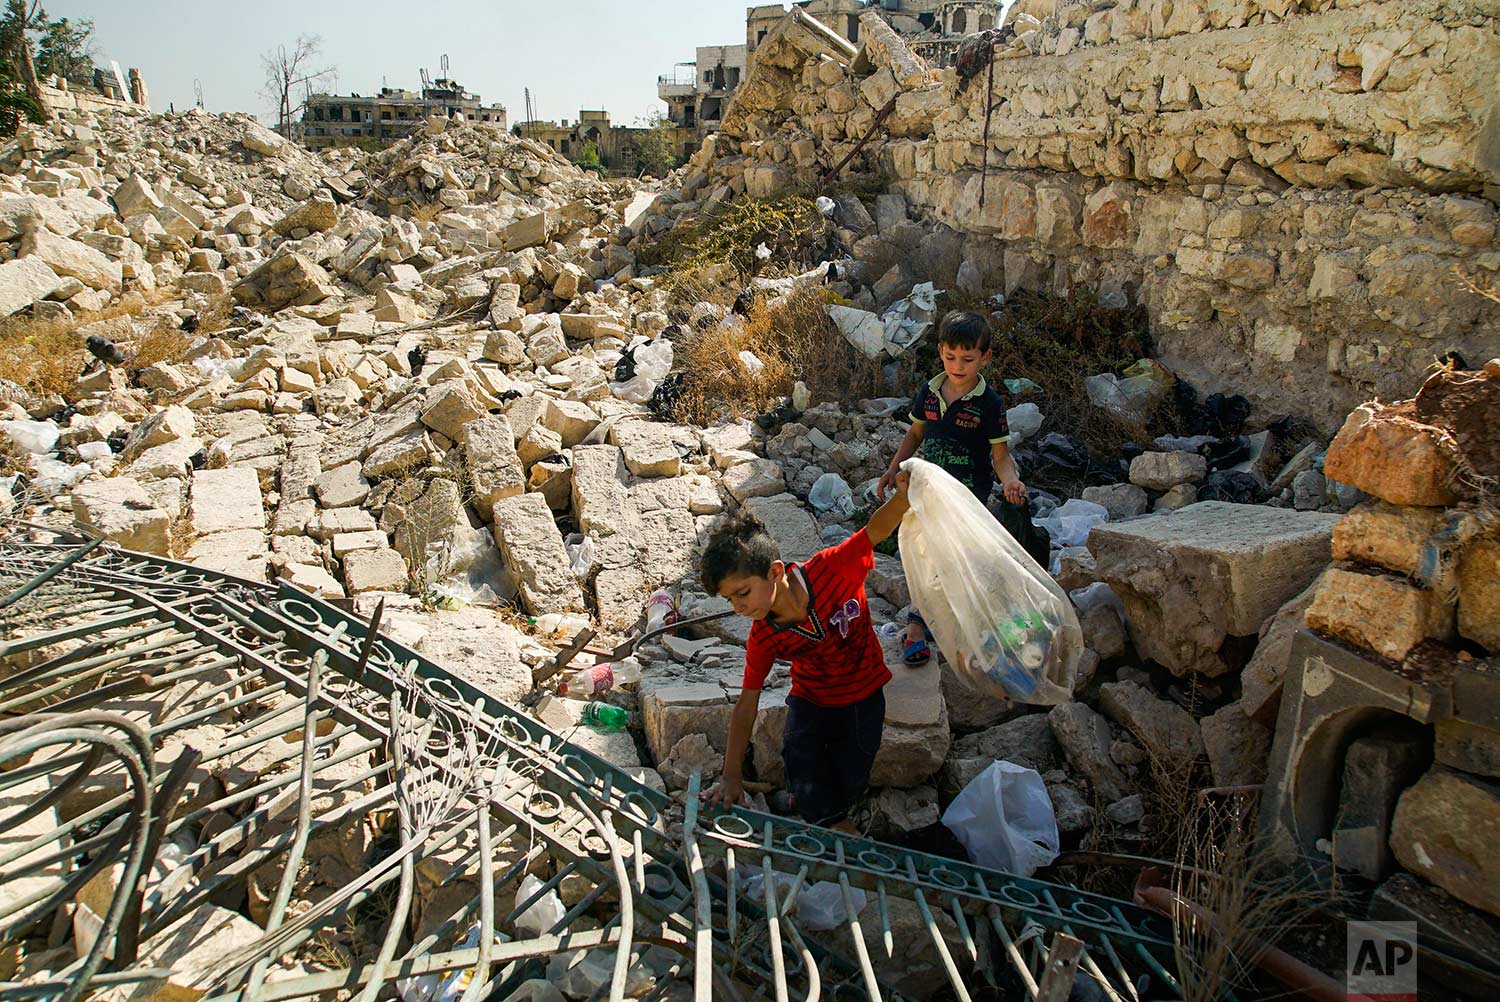  Young boys collect cans amid the rubble in Aleppo, Syria, on Tuesday, Sept. 12, 2017. The recapture of eastern Aleppo in December 2016, one of the deadliest episodes of the Syrian civil war, was a landmark victory for Assad's forces in the conflict,